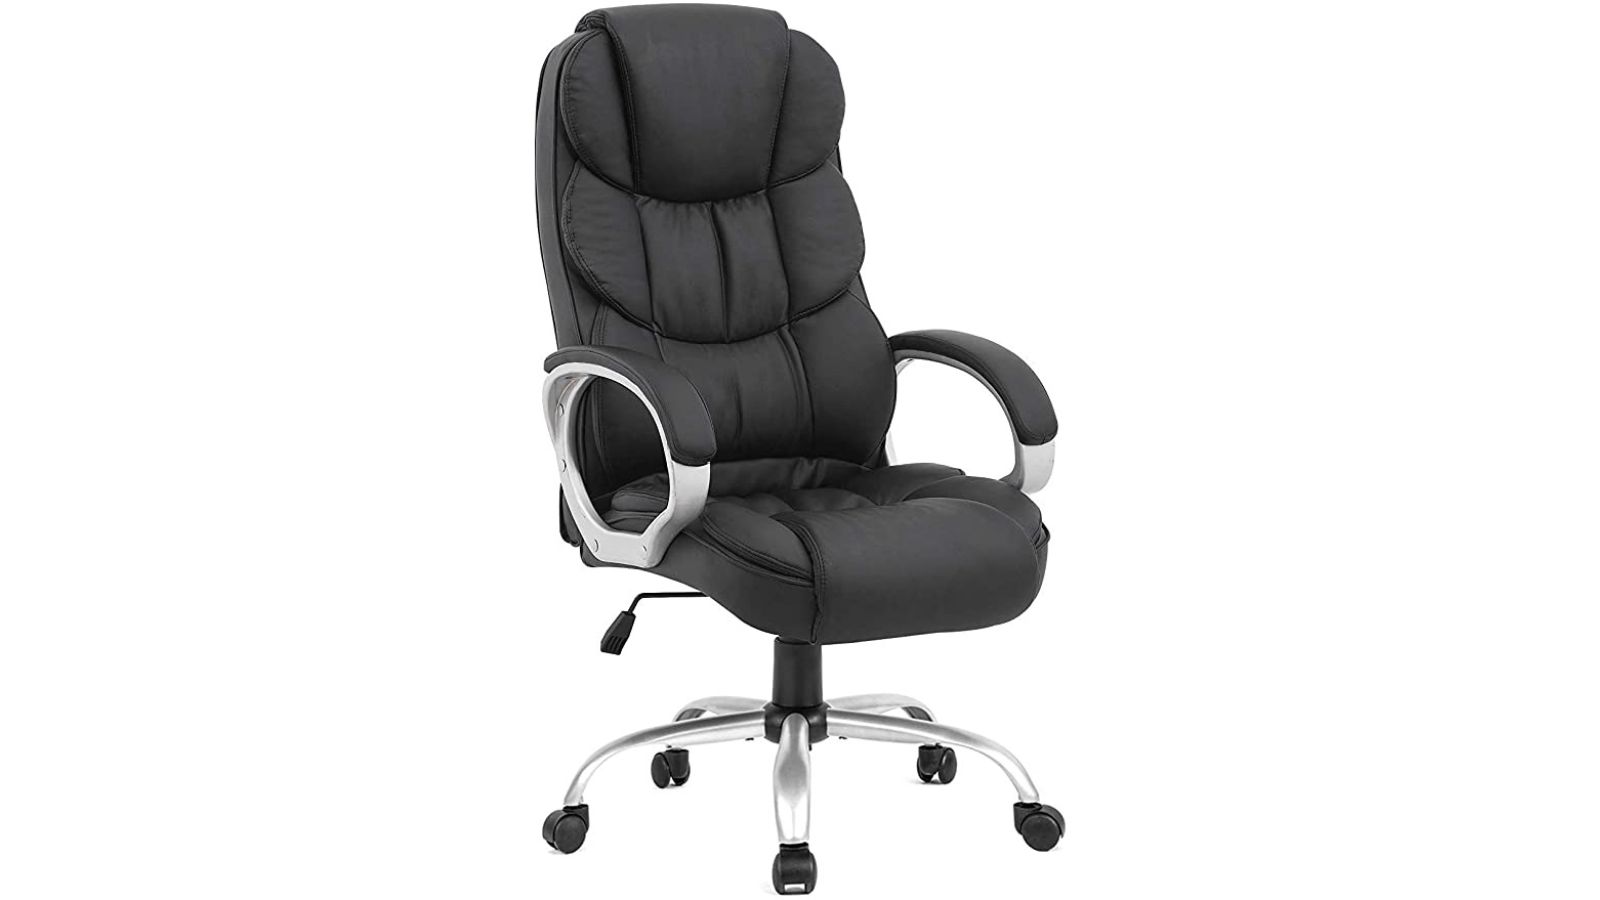 Ergnomic Office Chair